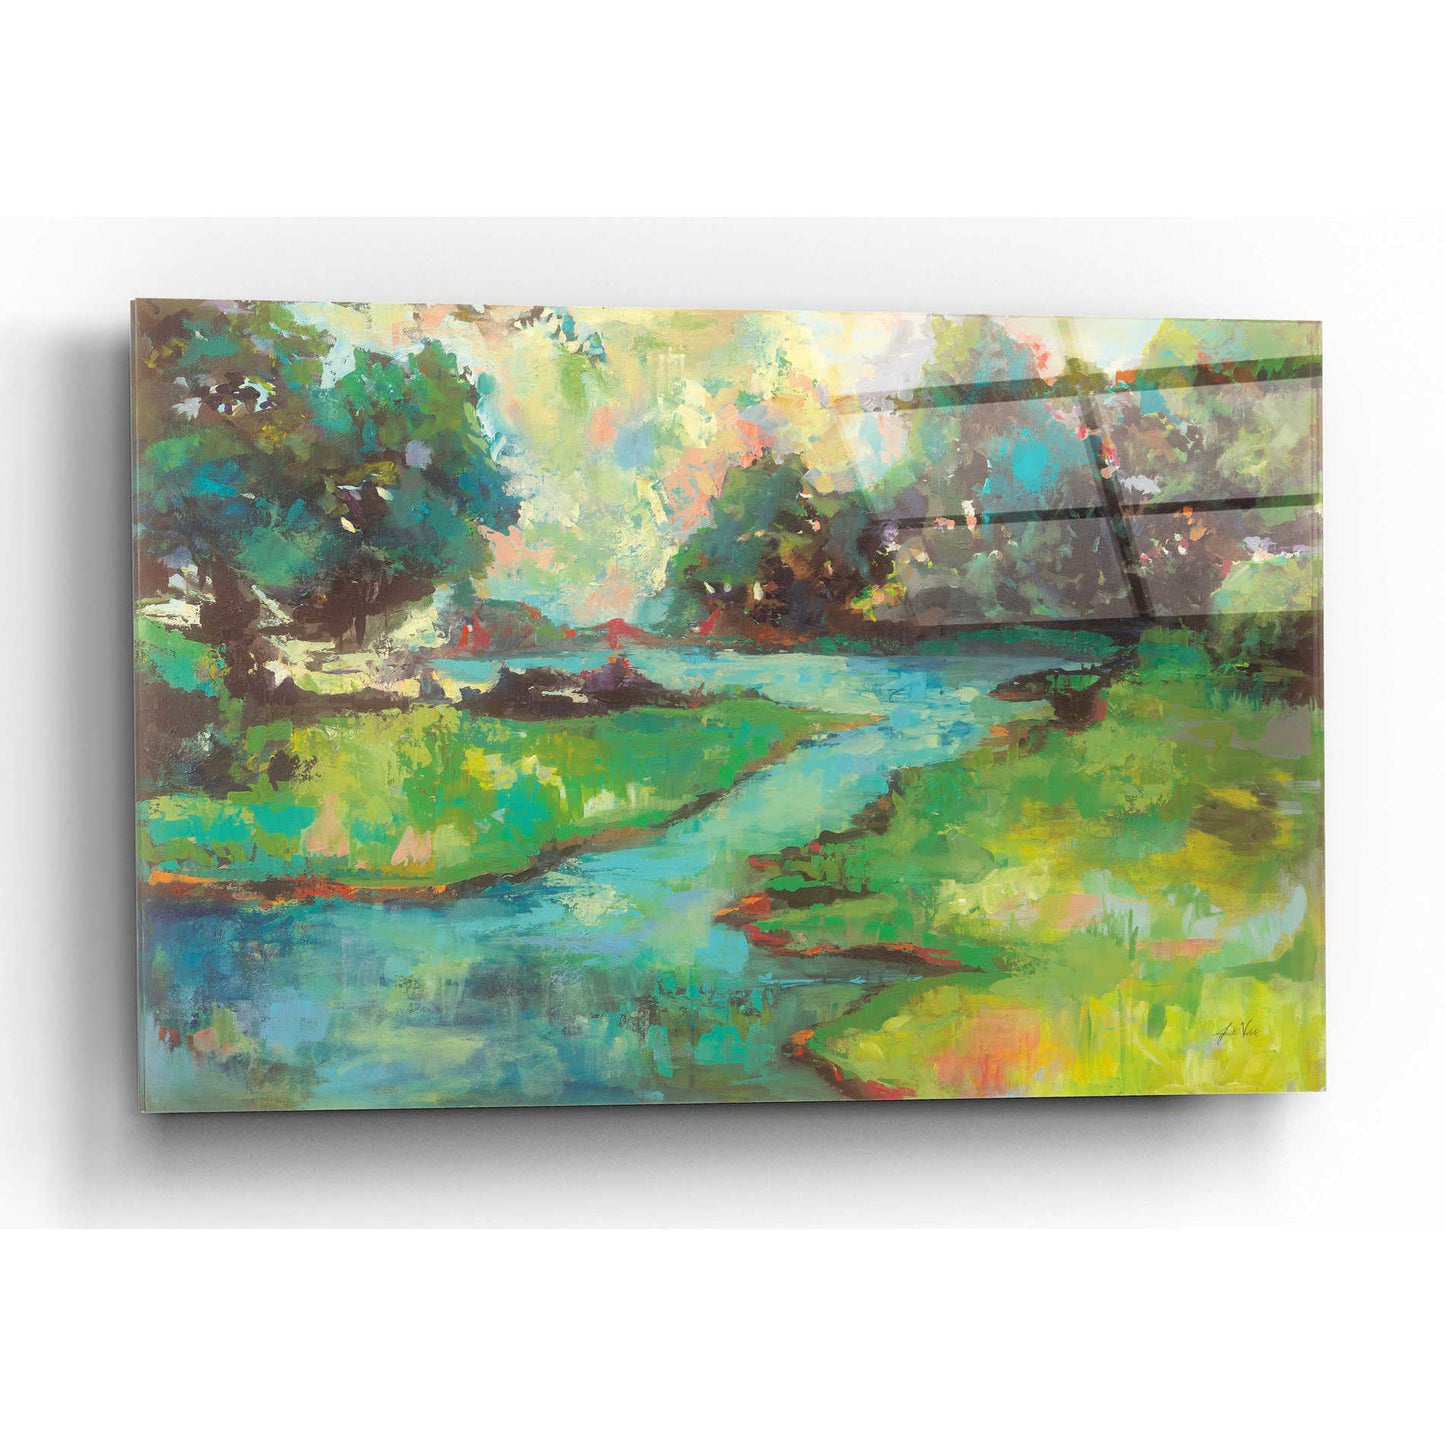 Epic Art 'Landscape in the Park' by Jeanette Vertentes, Acrylic Glass Wall Art,16x12